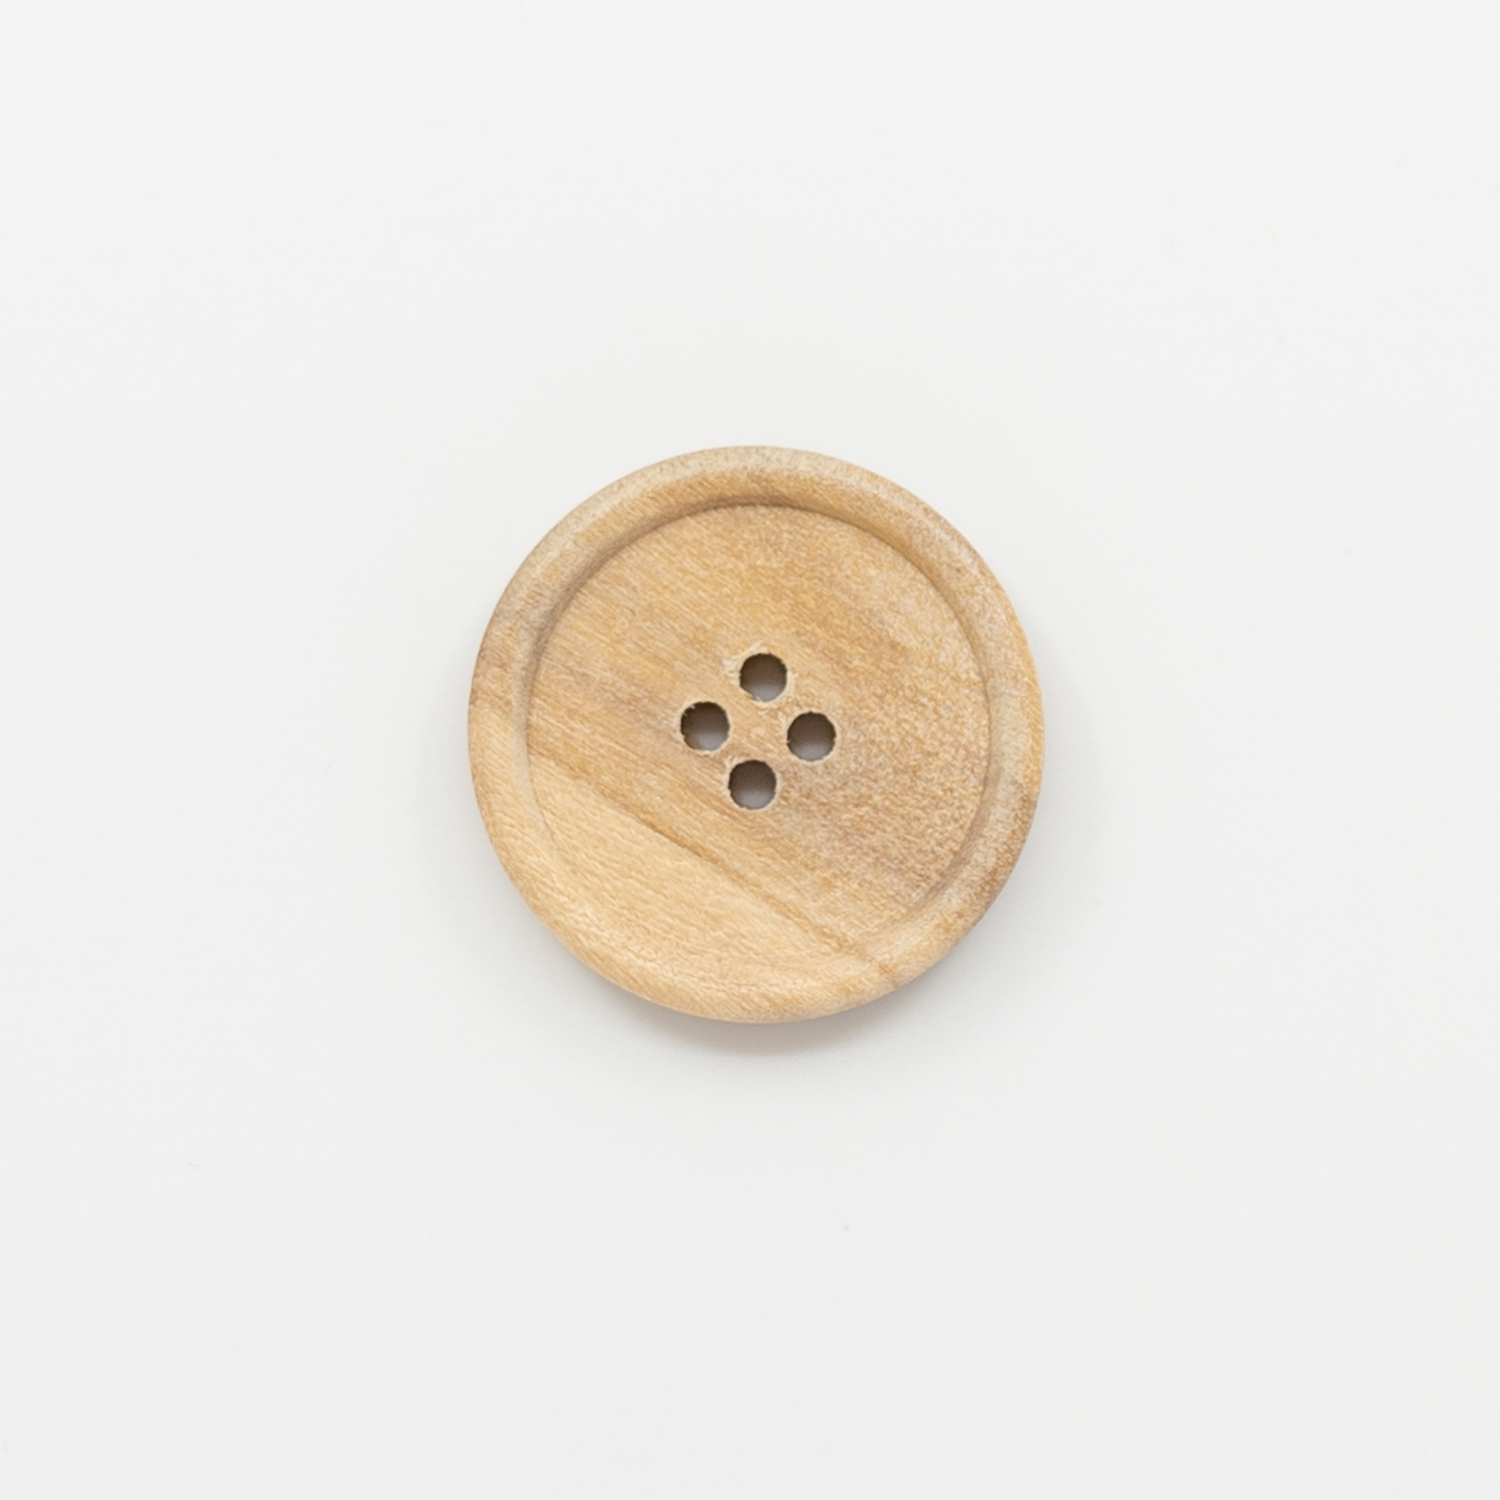  - Wooden button | Natural light wood button knitting - by HipKnitShop - 02/06/2022